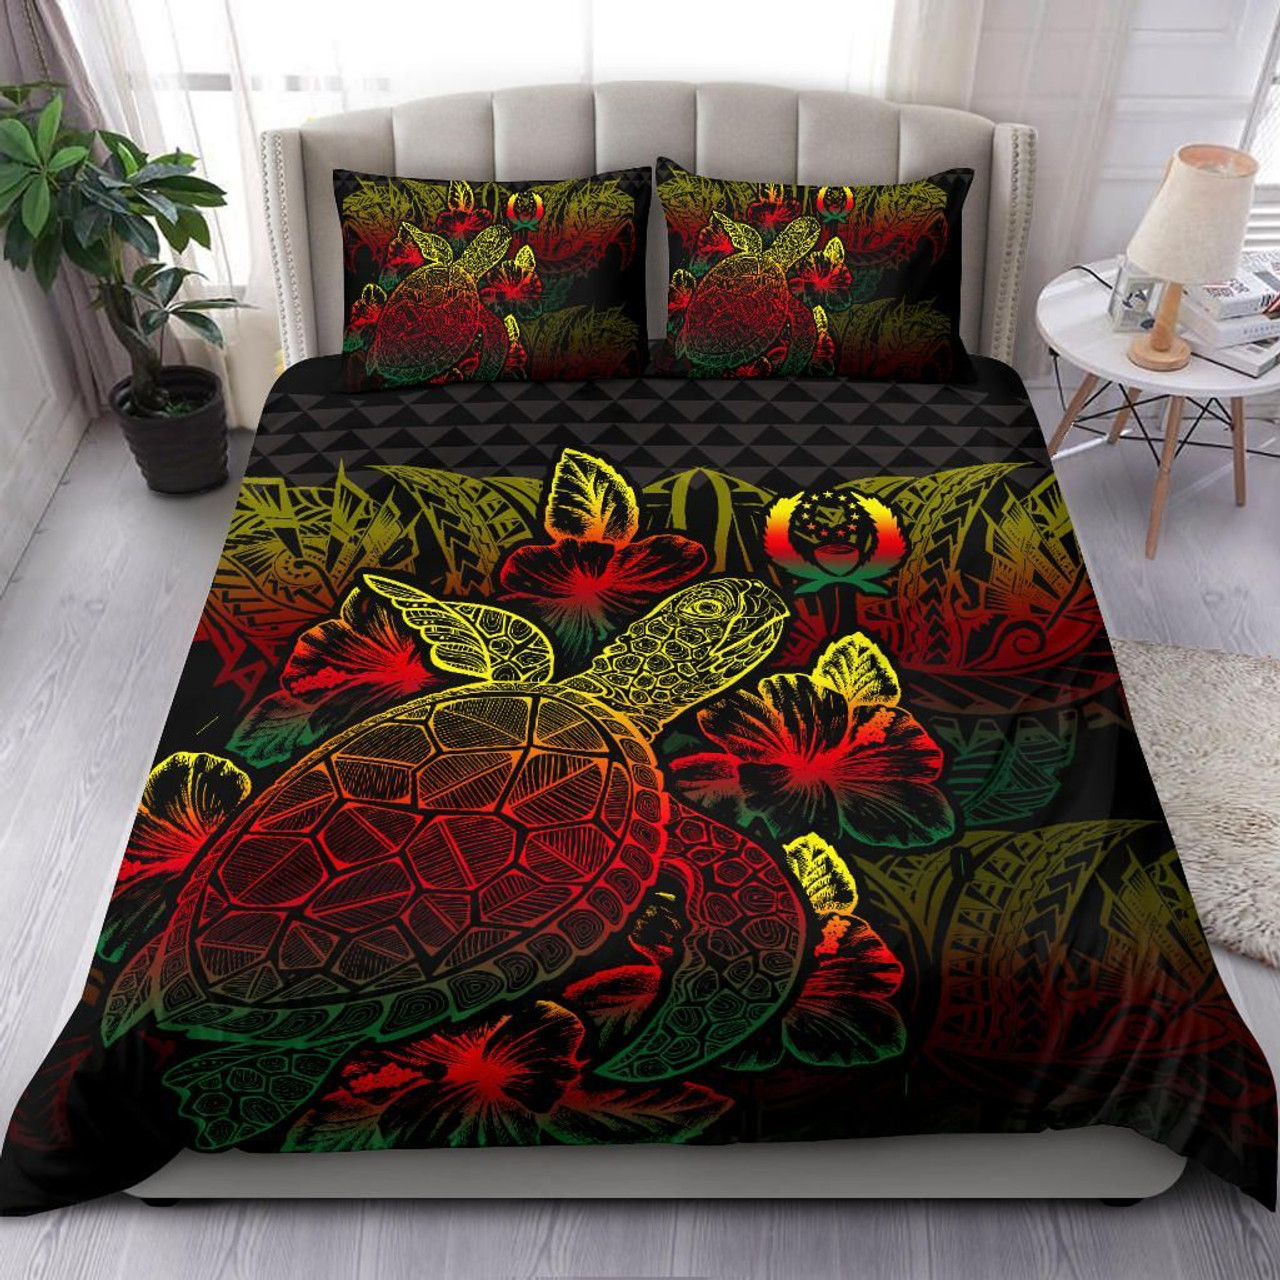 Polynesian Bedding Set - Pohnpei Duvet Cover Set Father And Son Red 5